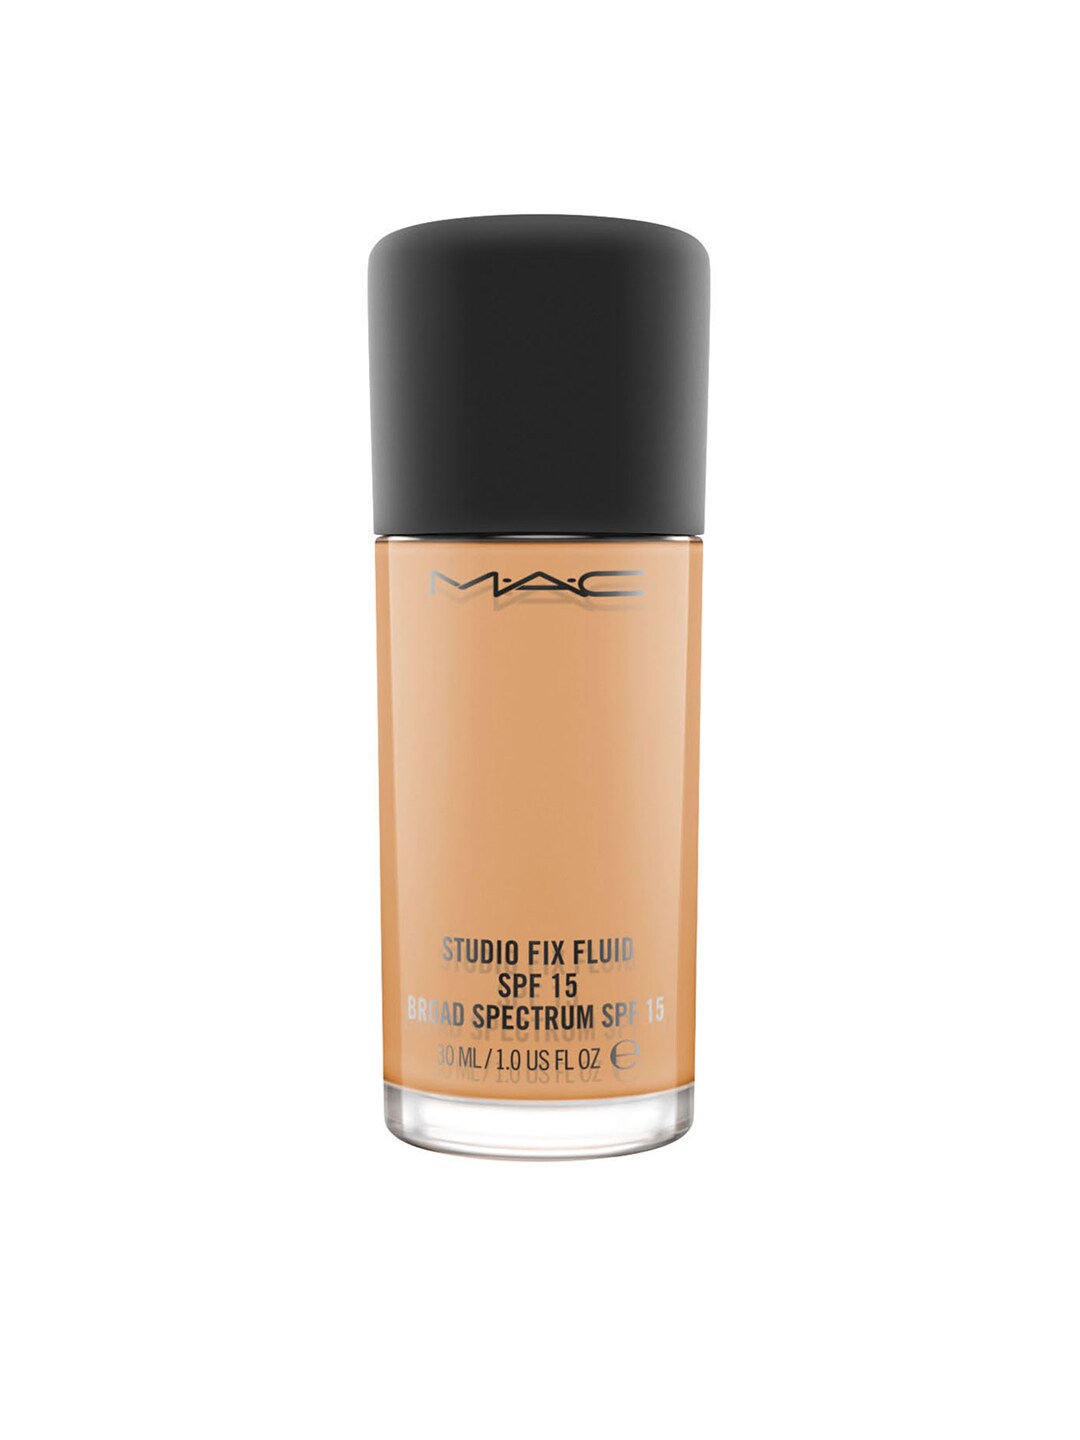 M.A.C Studio Fix Fluid Broad Spectrum Foundation with SPF 15 - NW40 30ml Price in India